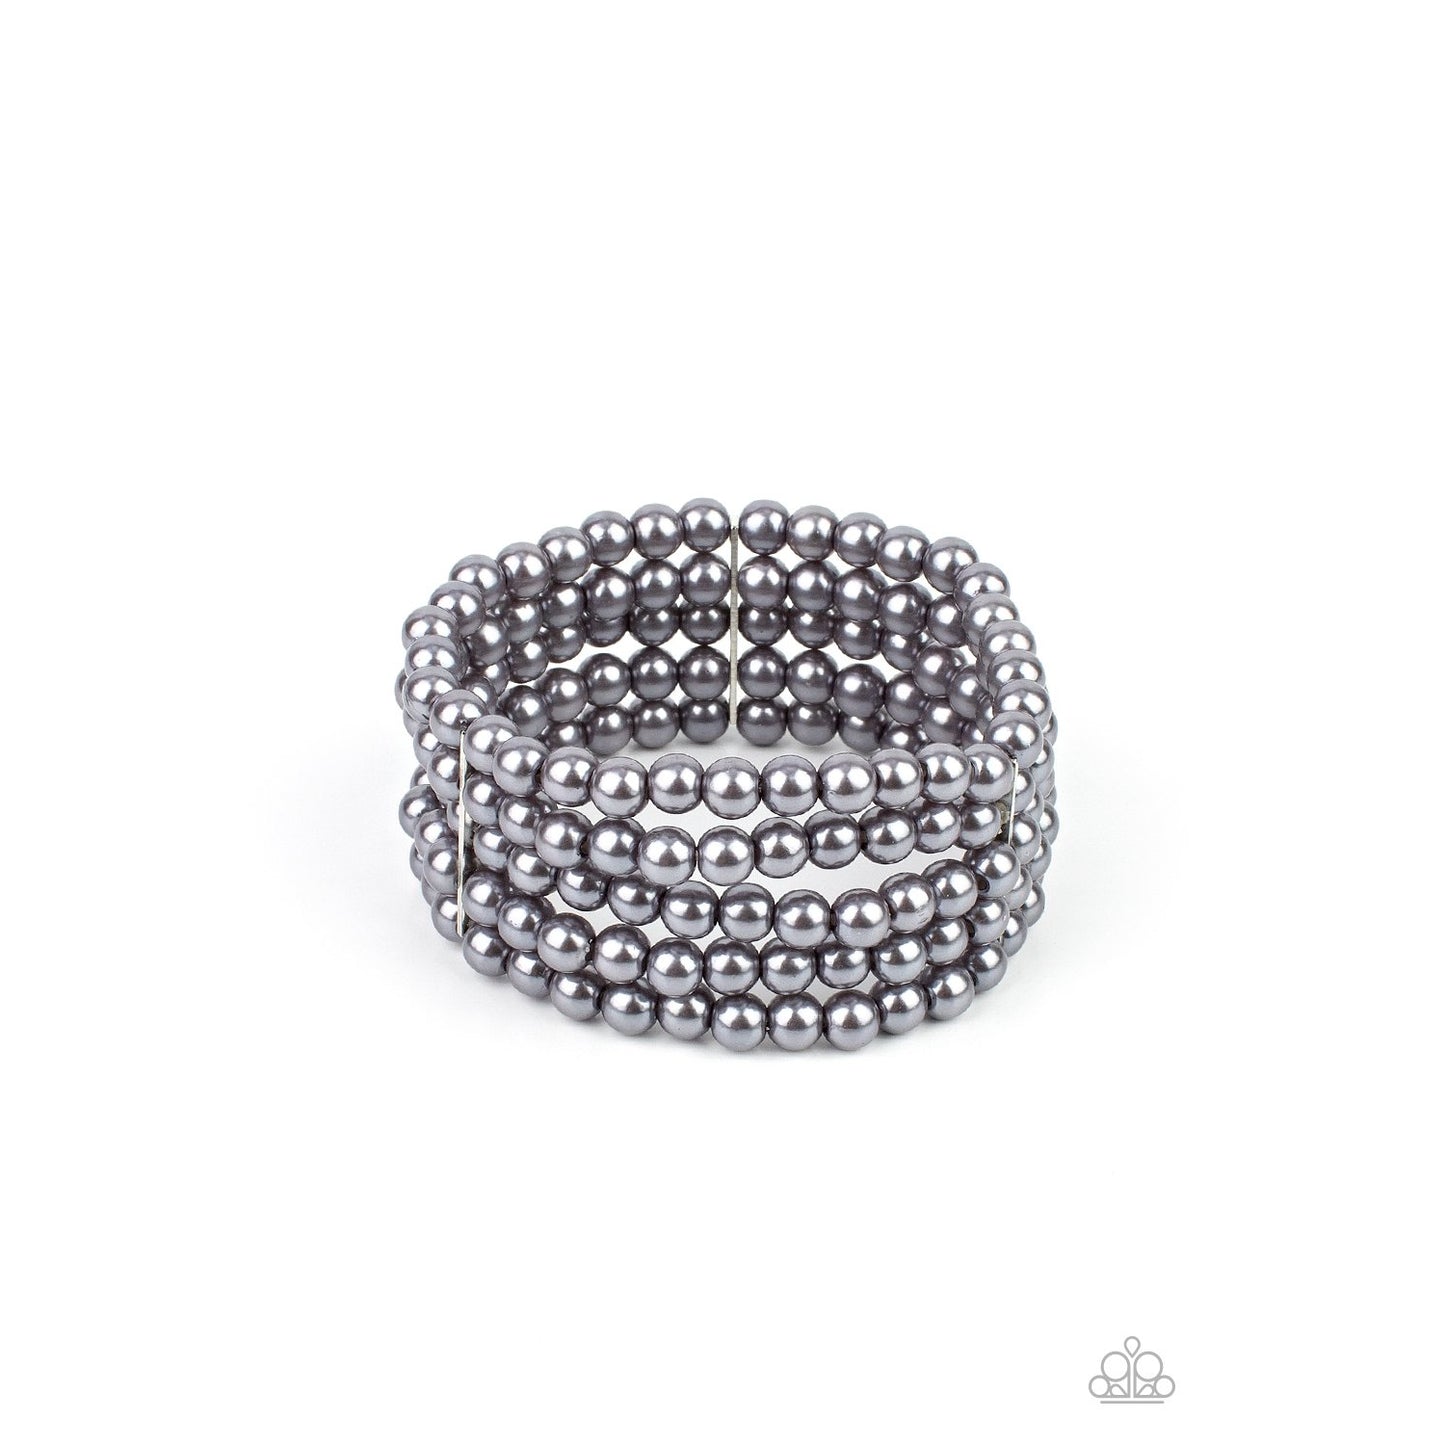 A Pearly Affair - Silver Pearl-like Bracelet - Paparazzi Accessories - GlaMarous Titi Jewels